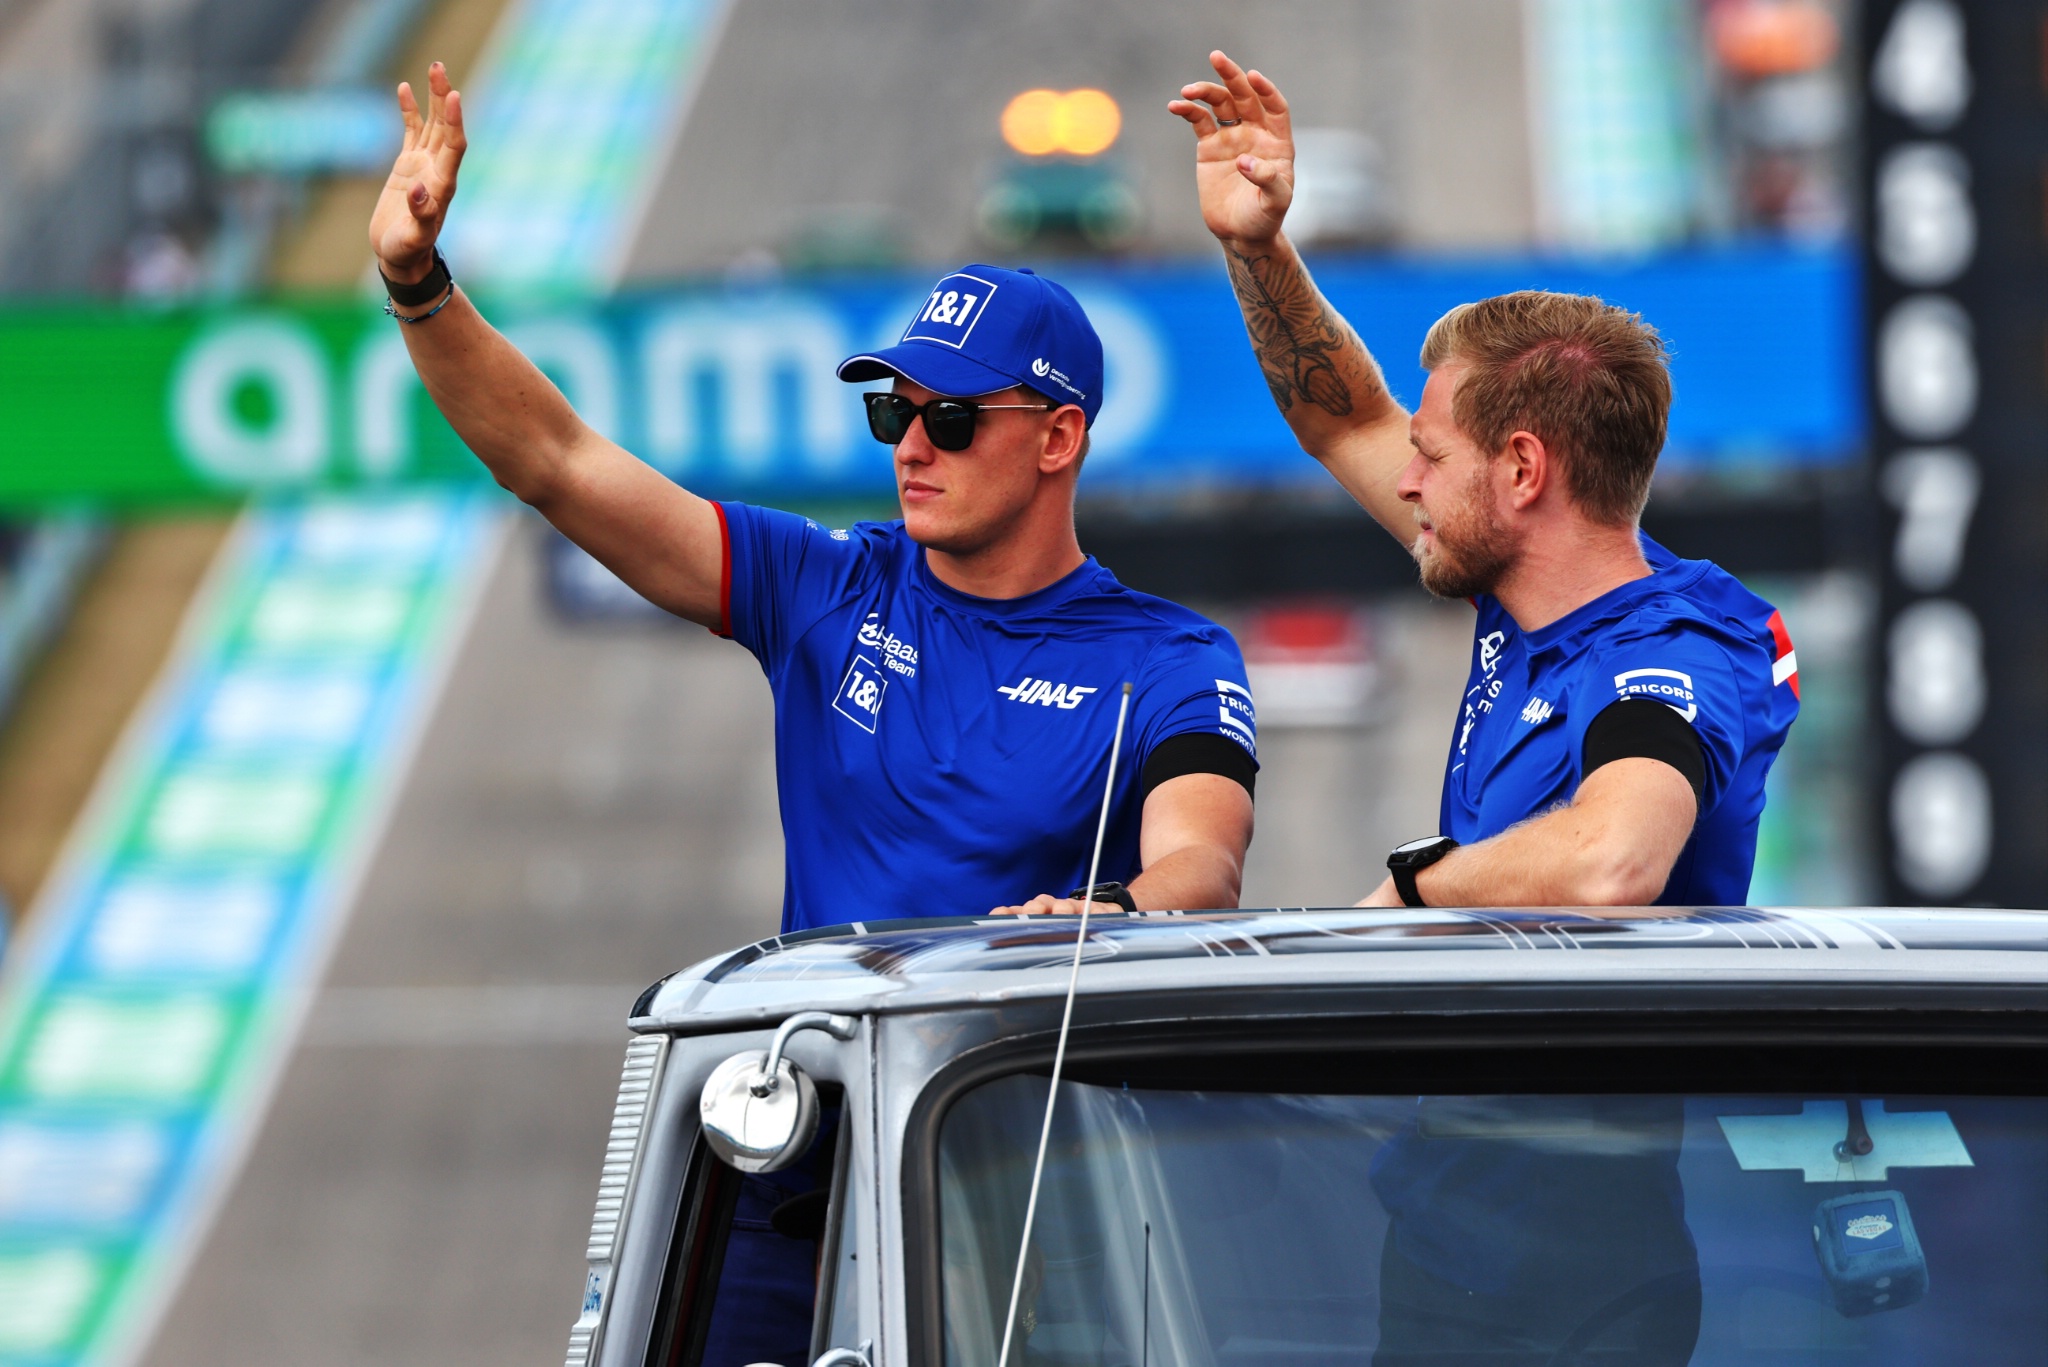 (L to R): Mick Schumacher (GER) Haas F1 Team and team mate Kevin Magnussen (DEN) Haas F1 Team on the drivers parade.